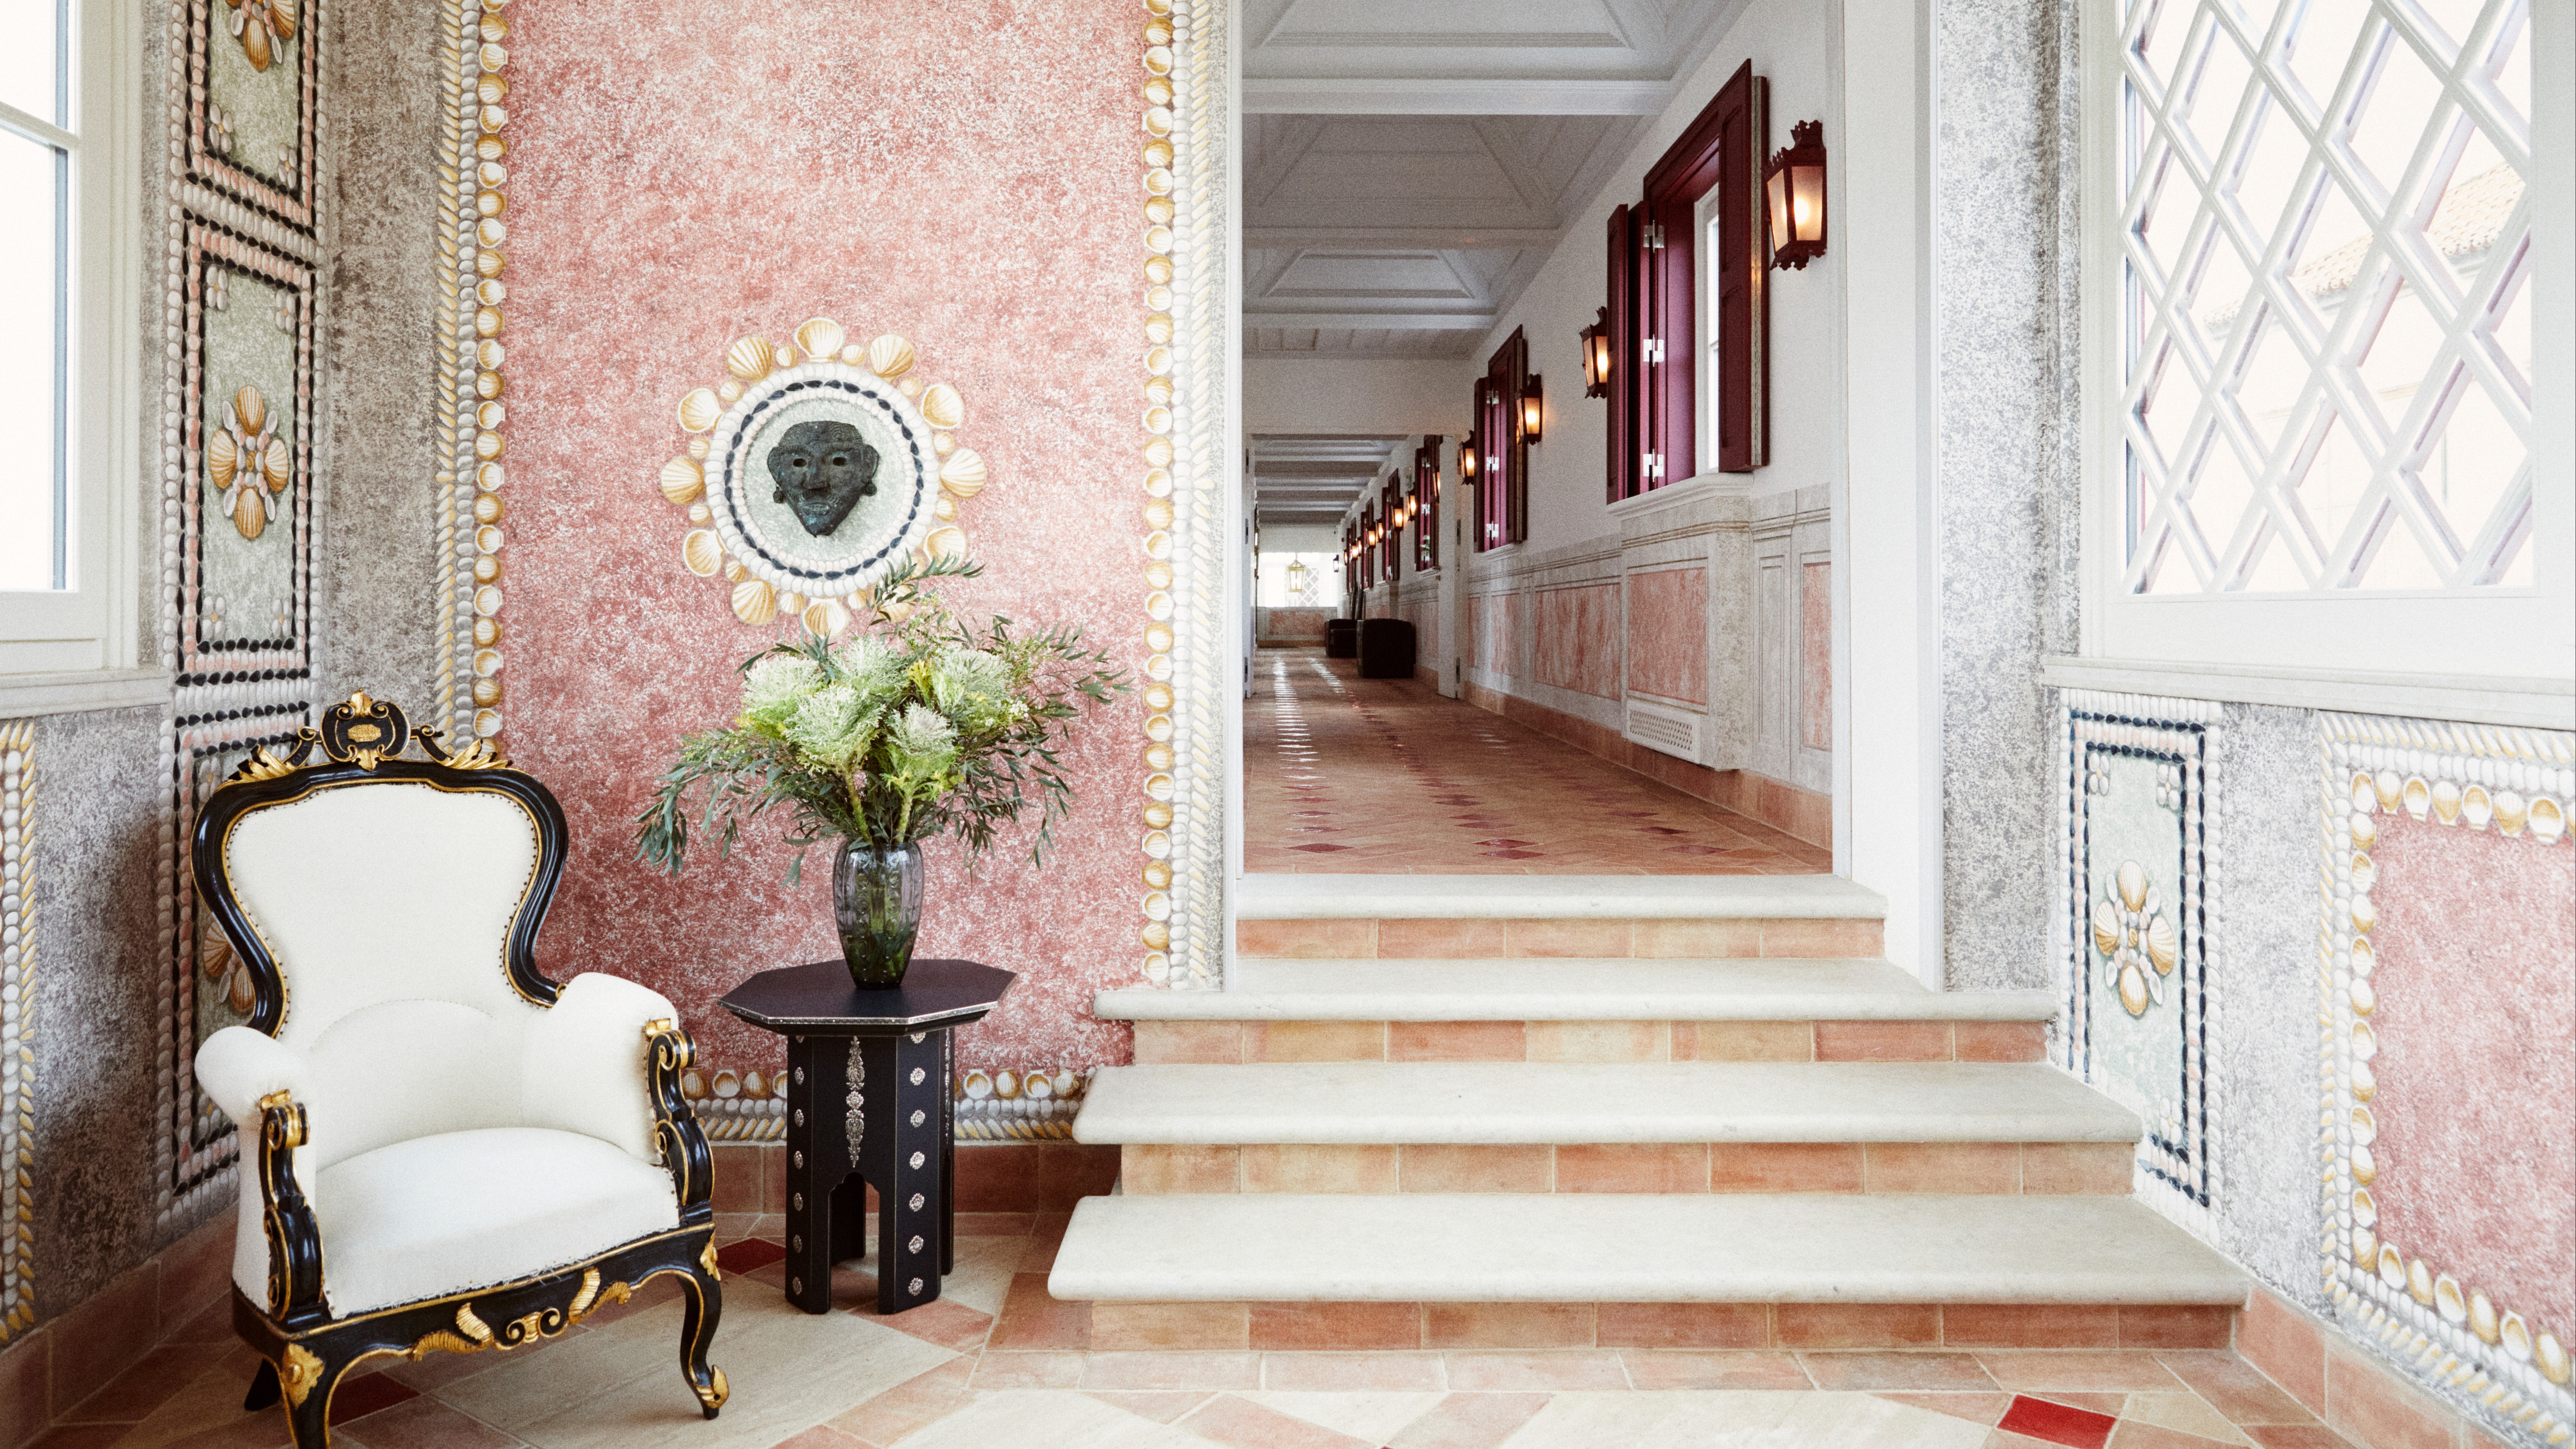 All about Vermelho: Christian Louboutin's hotel in Melides